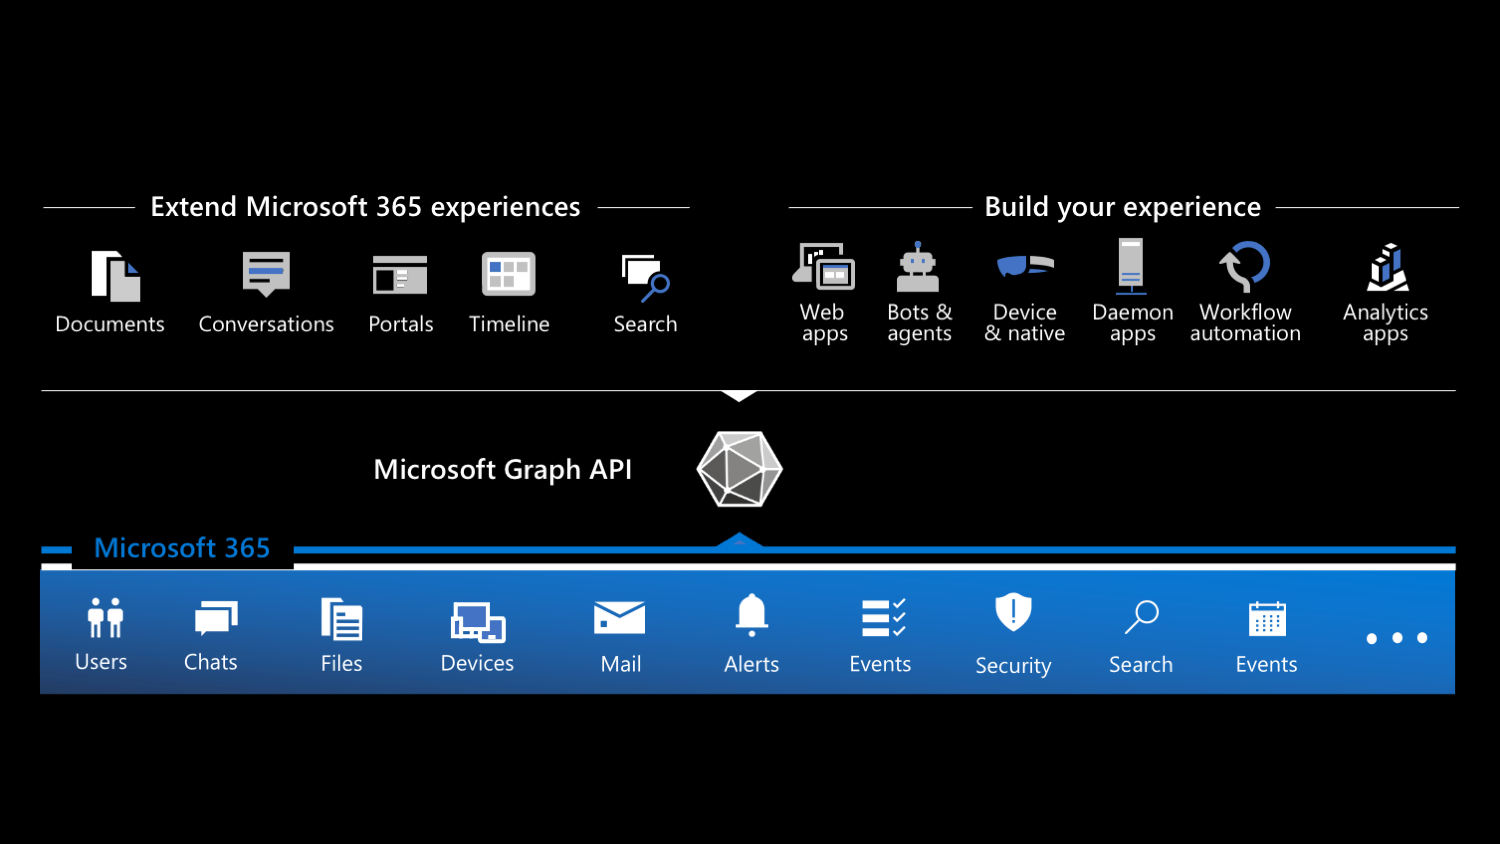 Types of apps that you can build on Microsoft 365 grouped into extensions and custom apps